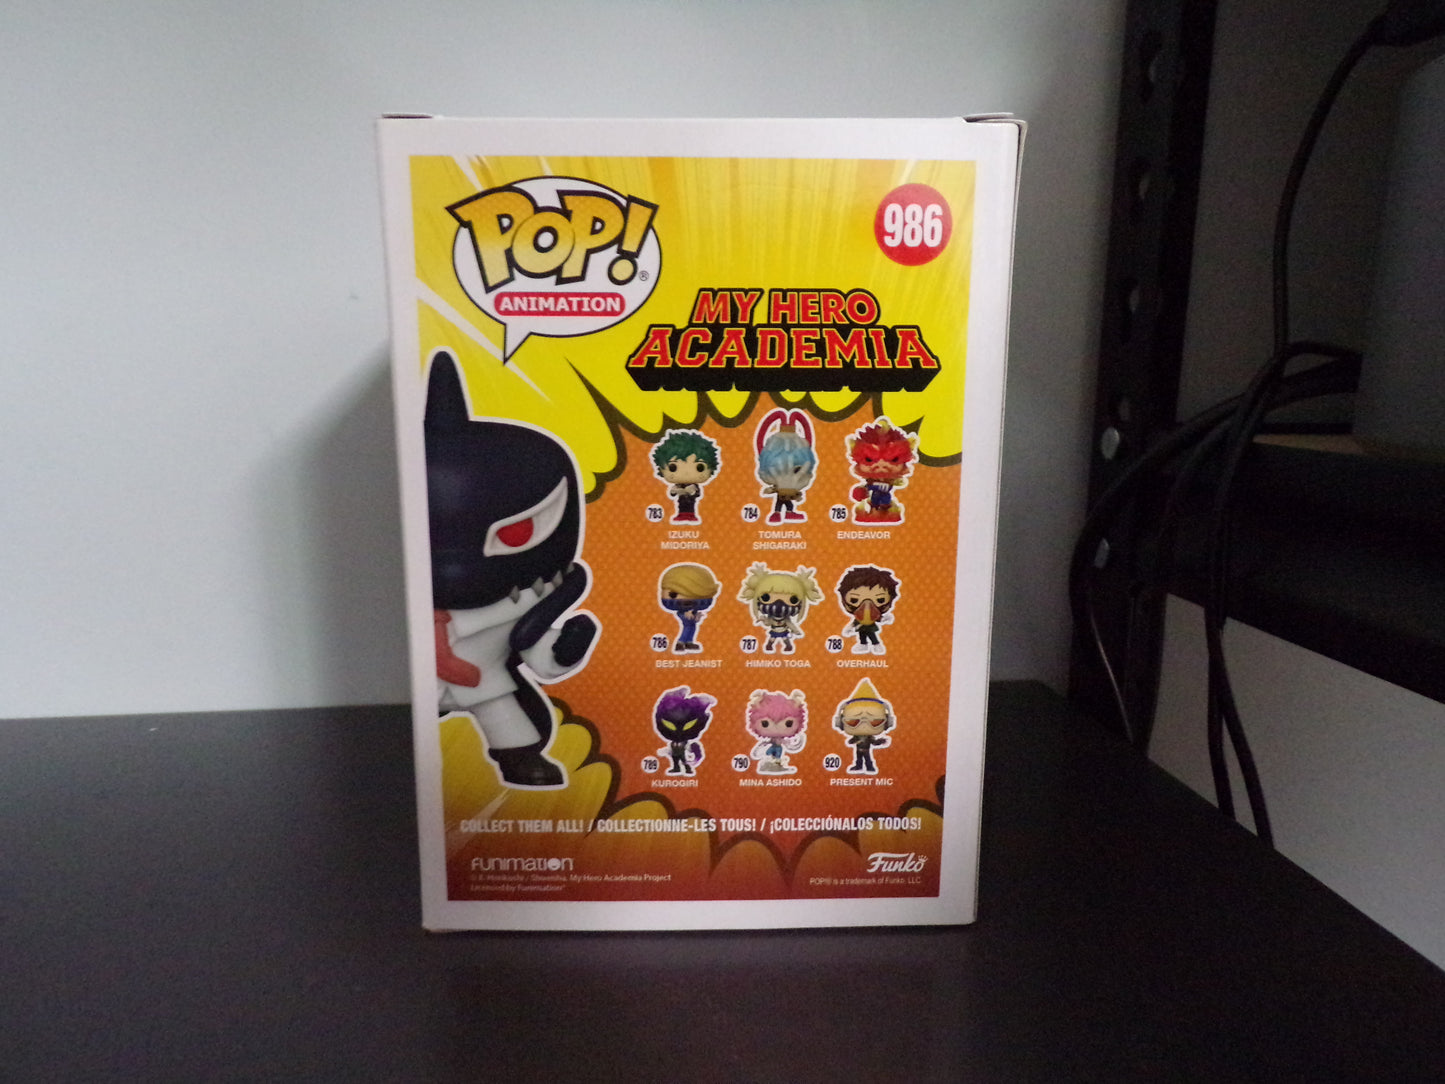 My Hero Academia - Gang Orca 2021 Summer Convention Exclusive #986